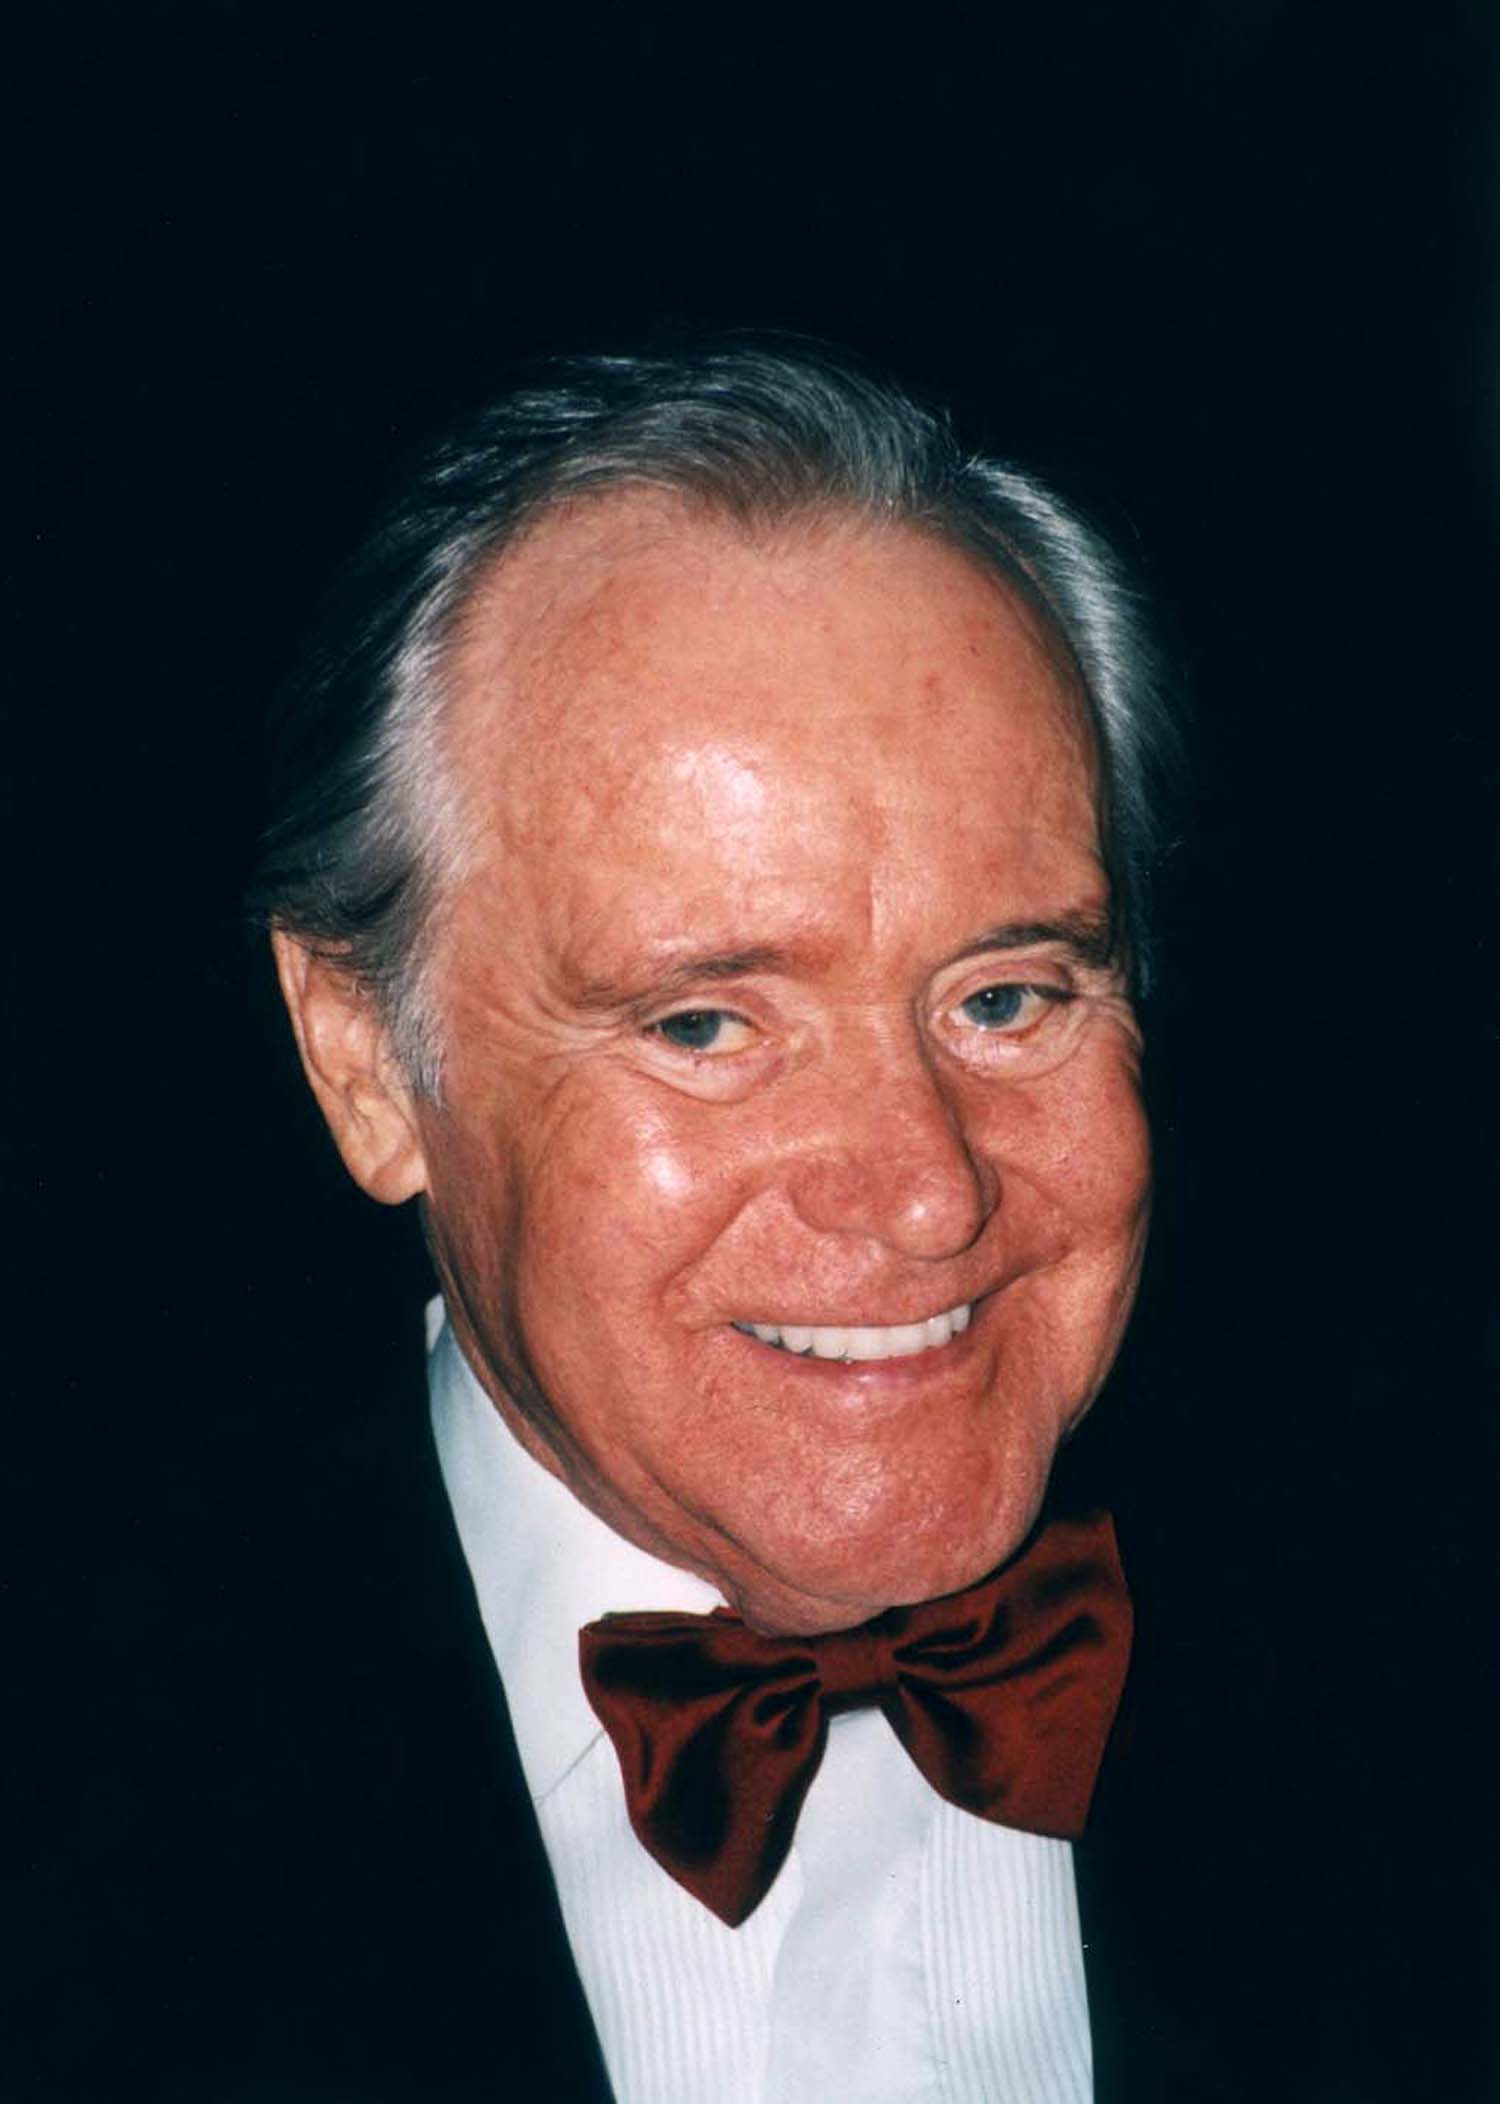 A photo of actor Jack Lemmon from 2002. | Source: Wikimedia Commons